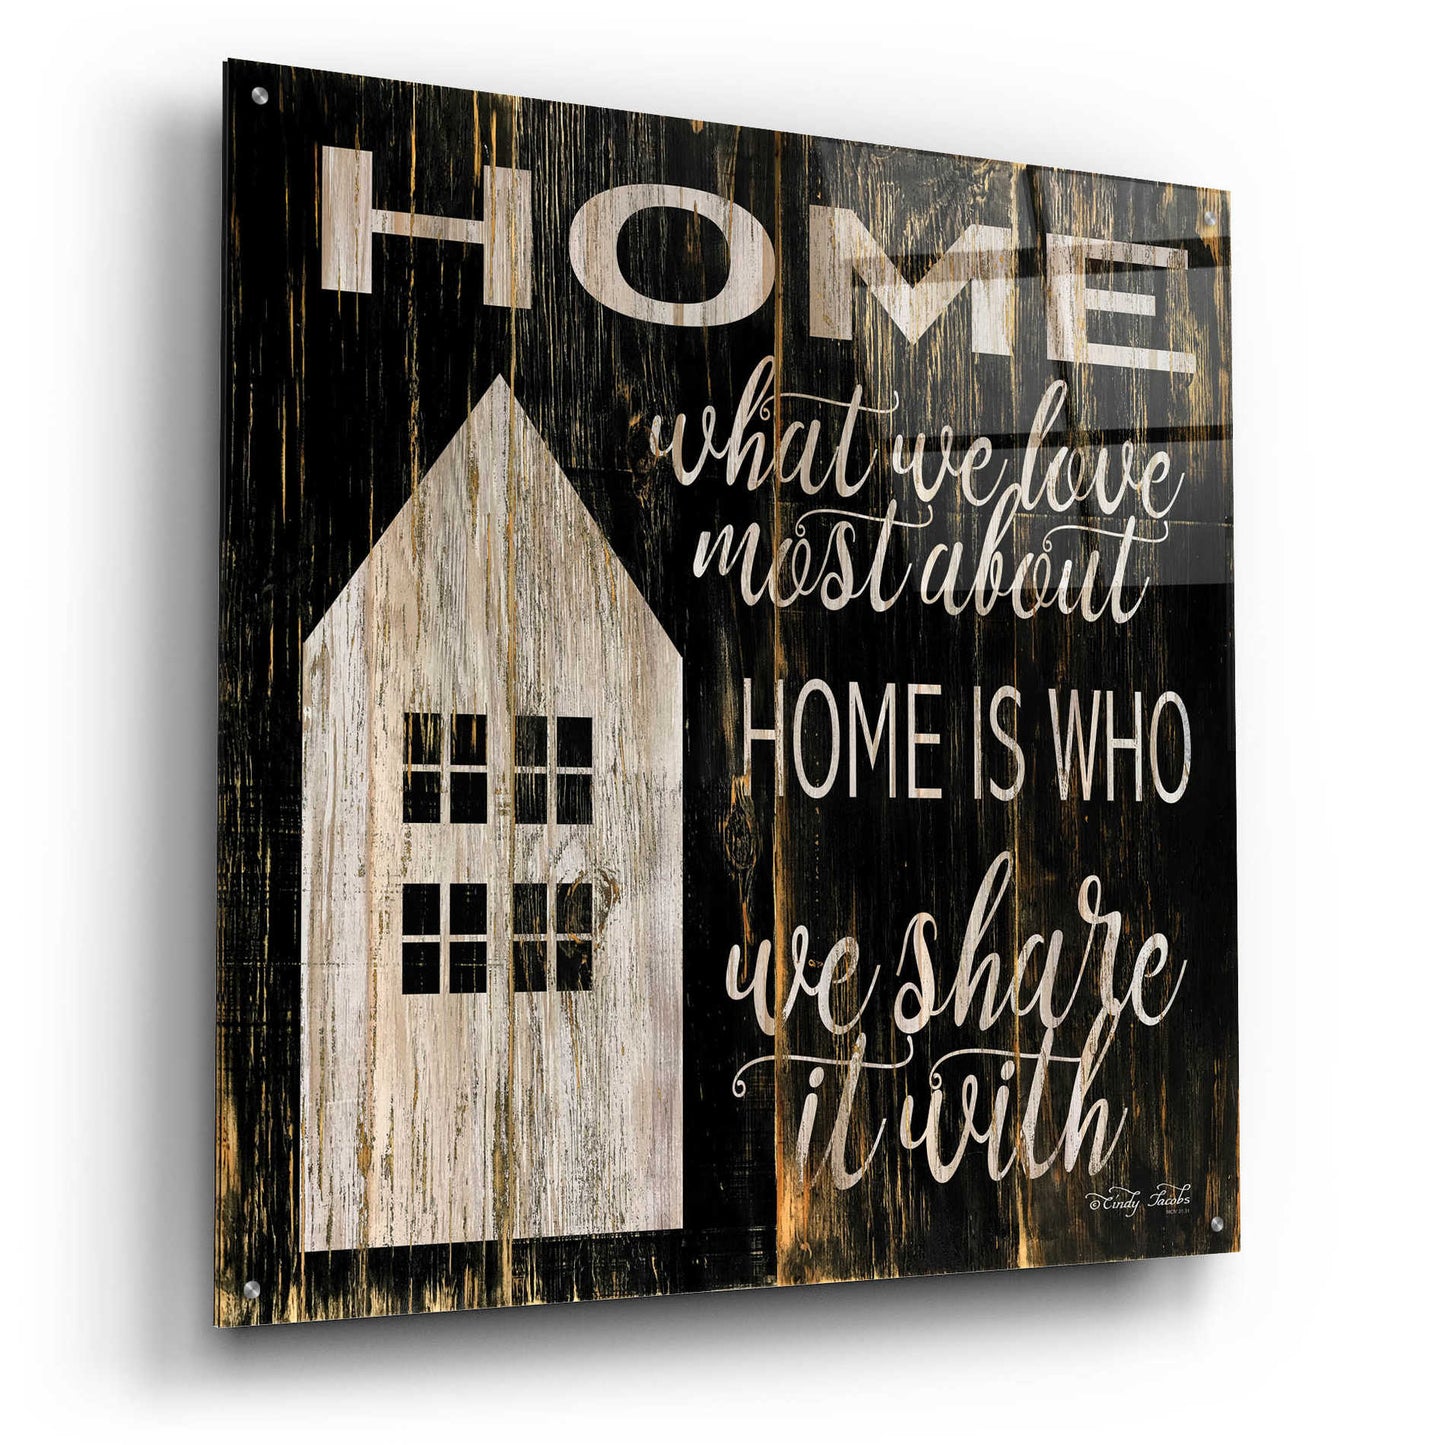 Epic Art 'Home is Who We Share It With' by Cindy Jacobs, Acrylic Glass Wall Art,36x36